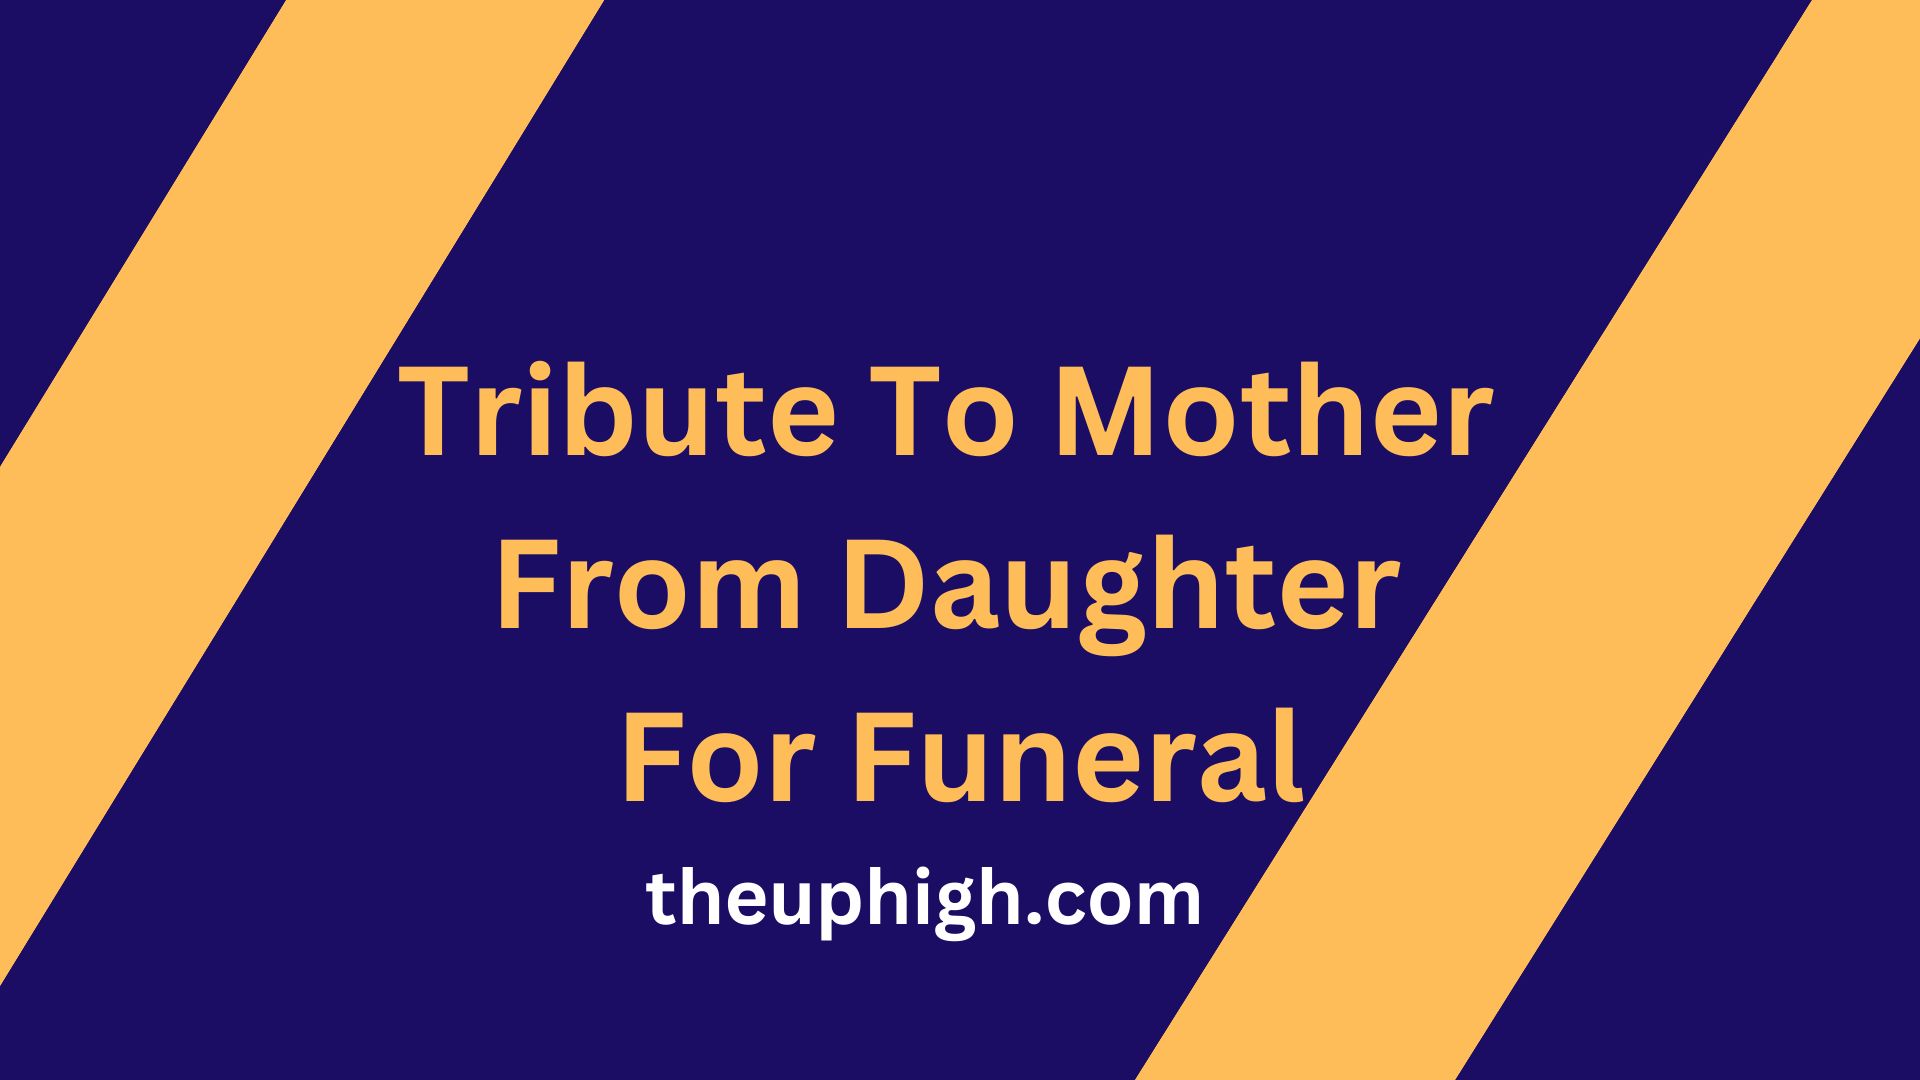 Tribute To Mother From Daughter For Funeral